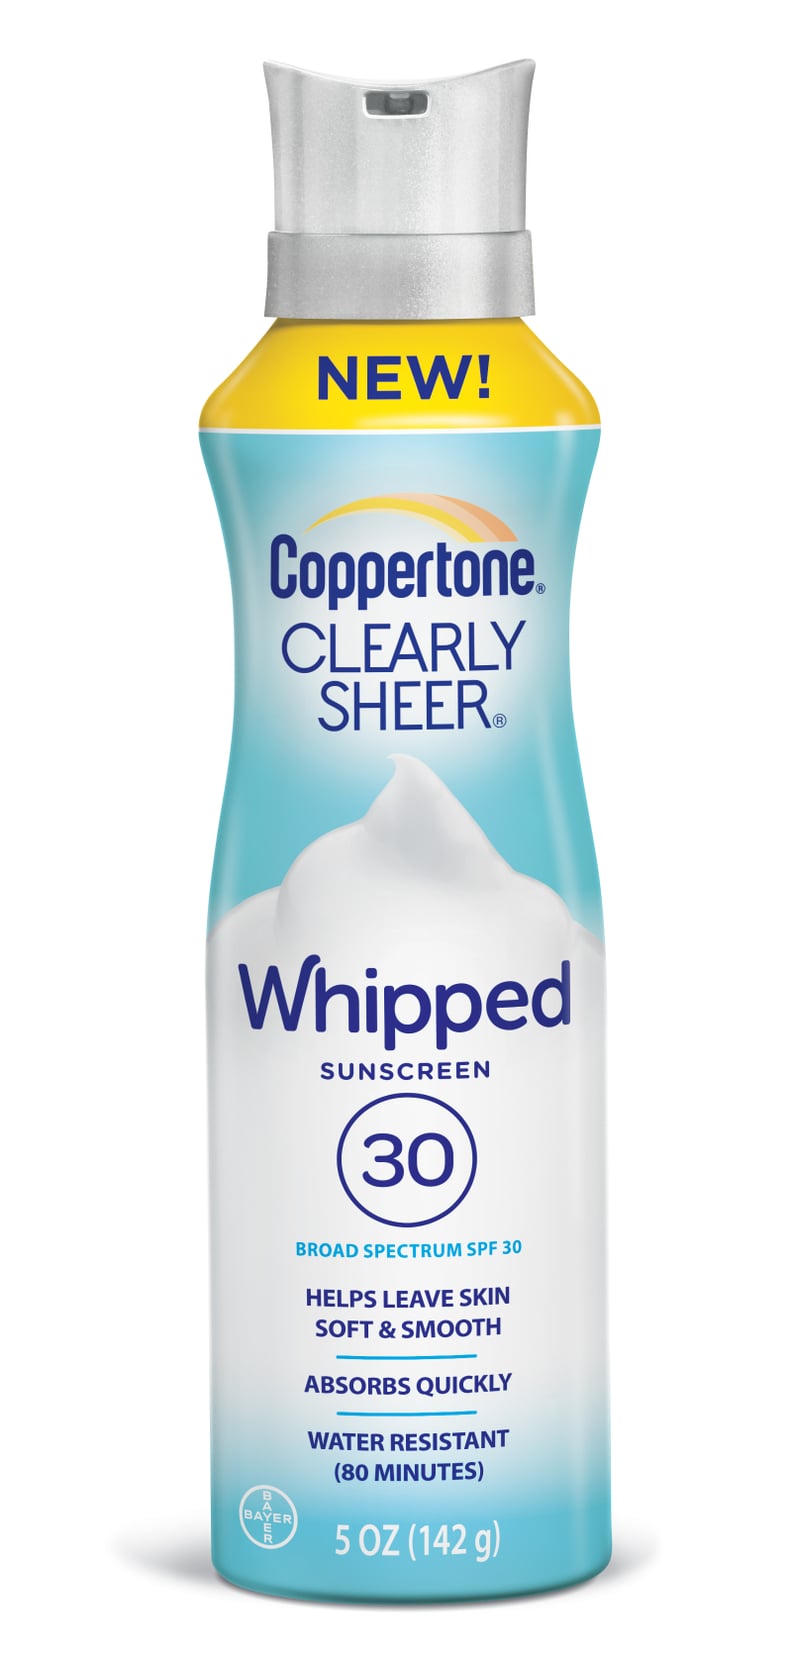 Coppertone Clearly Sheer Whipped Sunscreen SPF 30